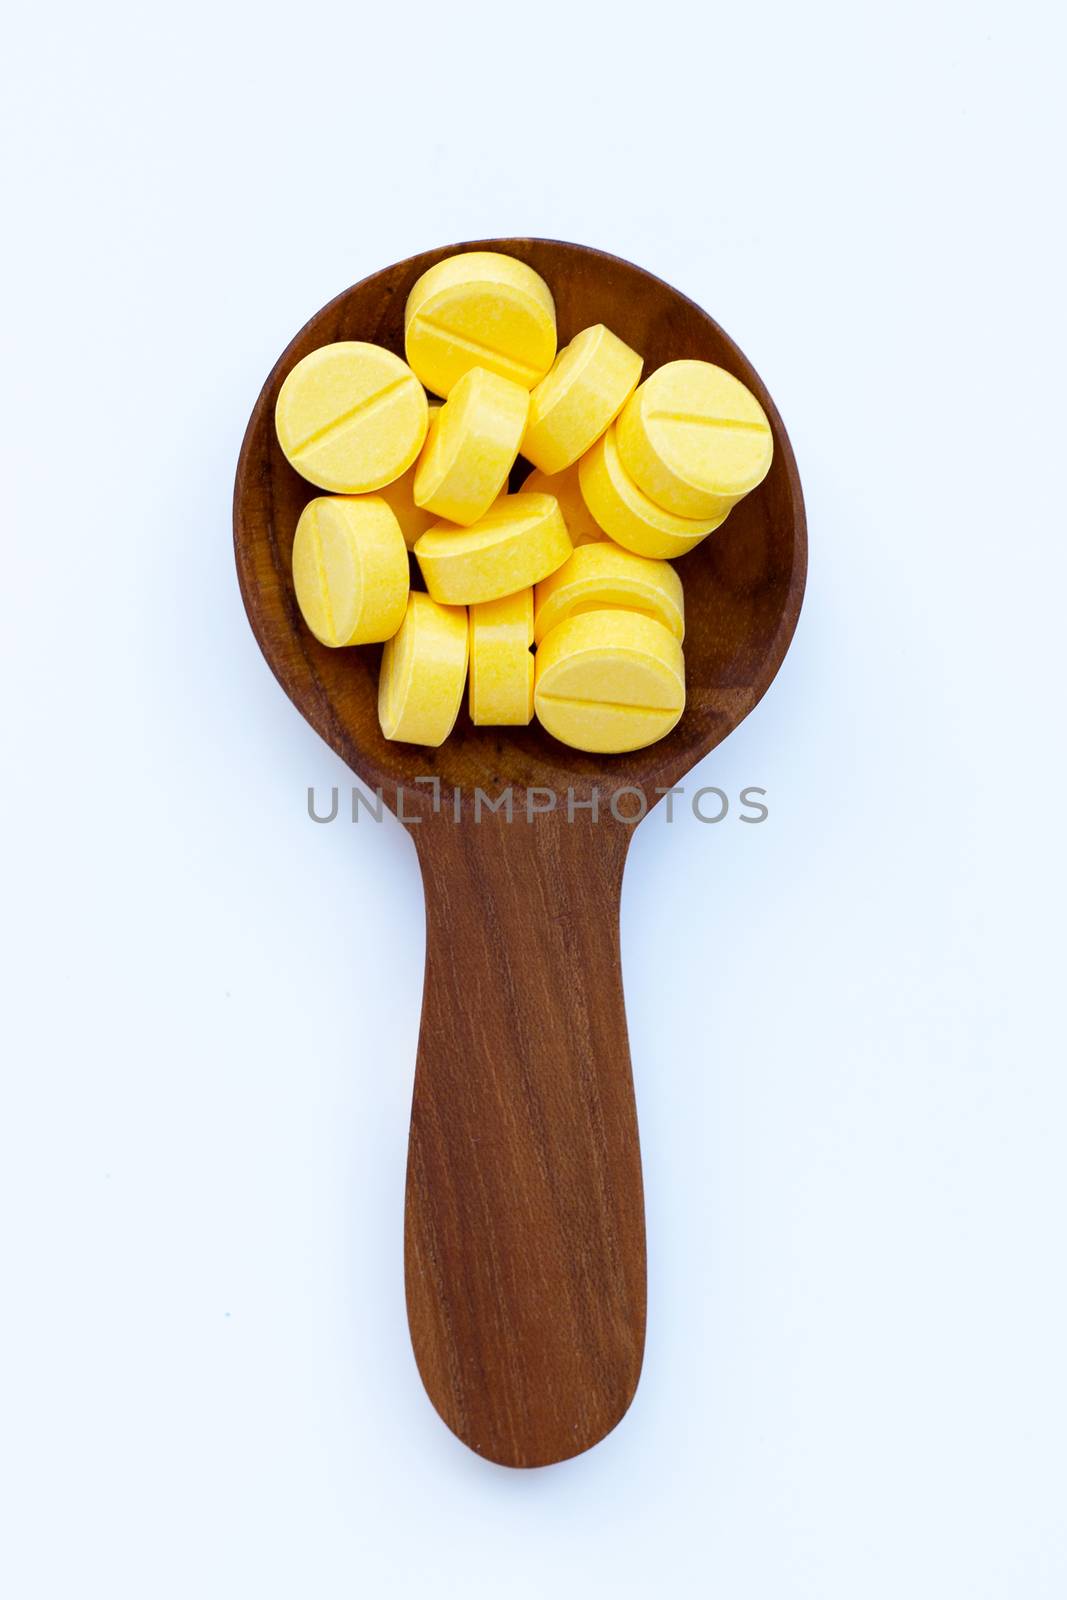 Yellow tablets of Paracetamol on white background.  